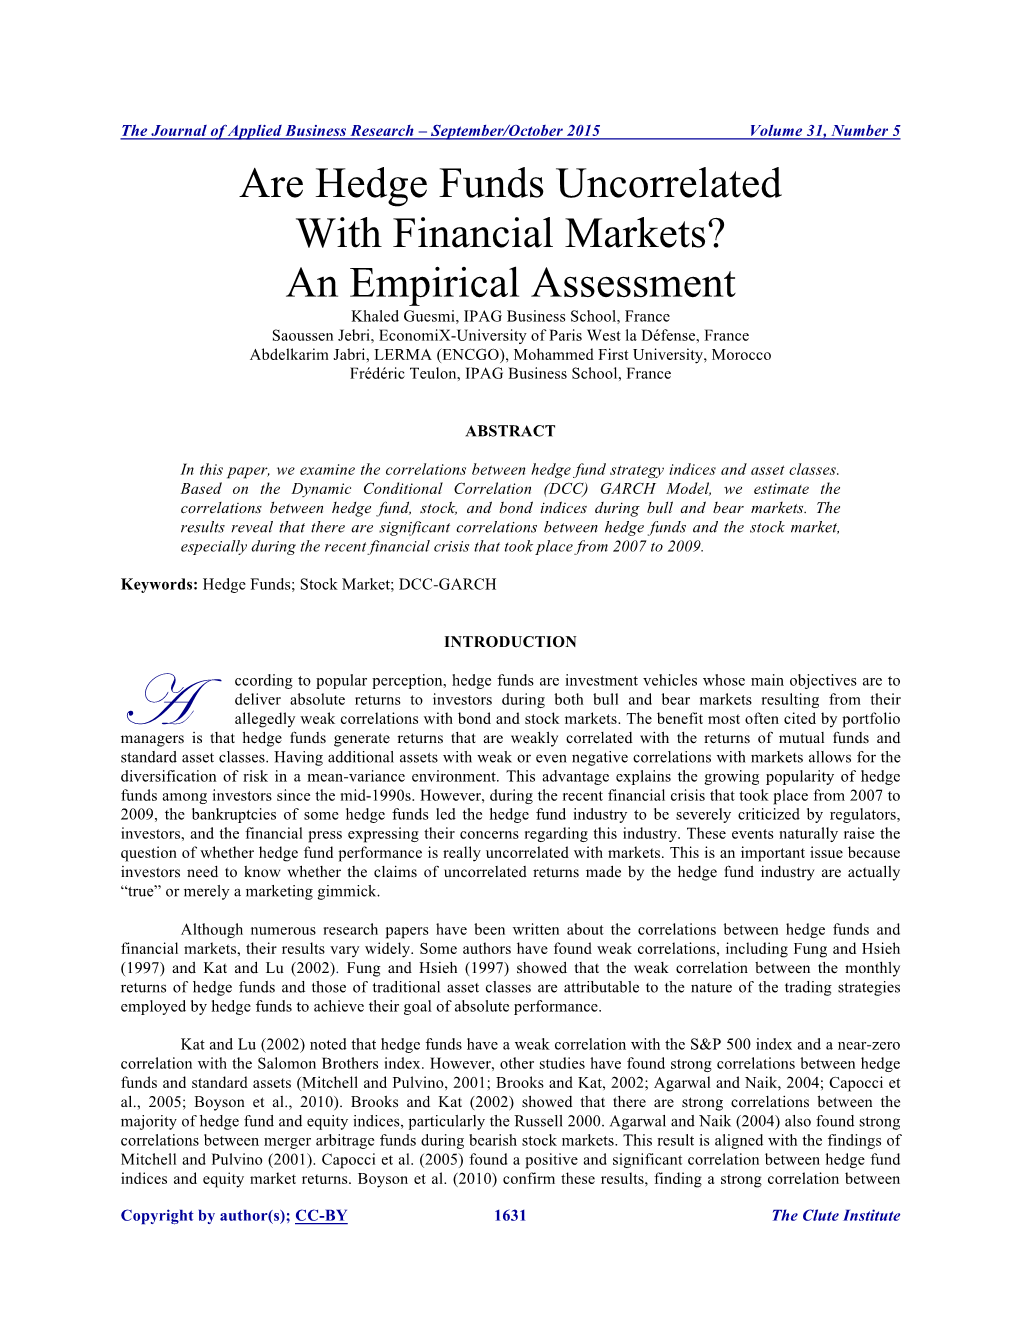 Are Hedge Funds Uncorrelated with Financial Markets?